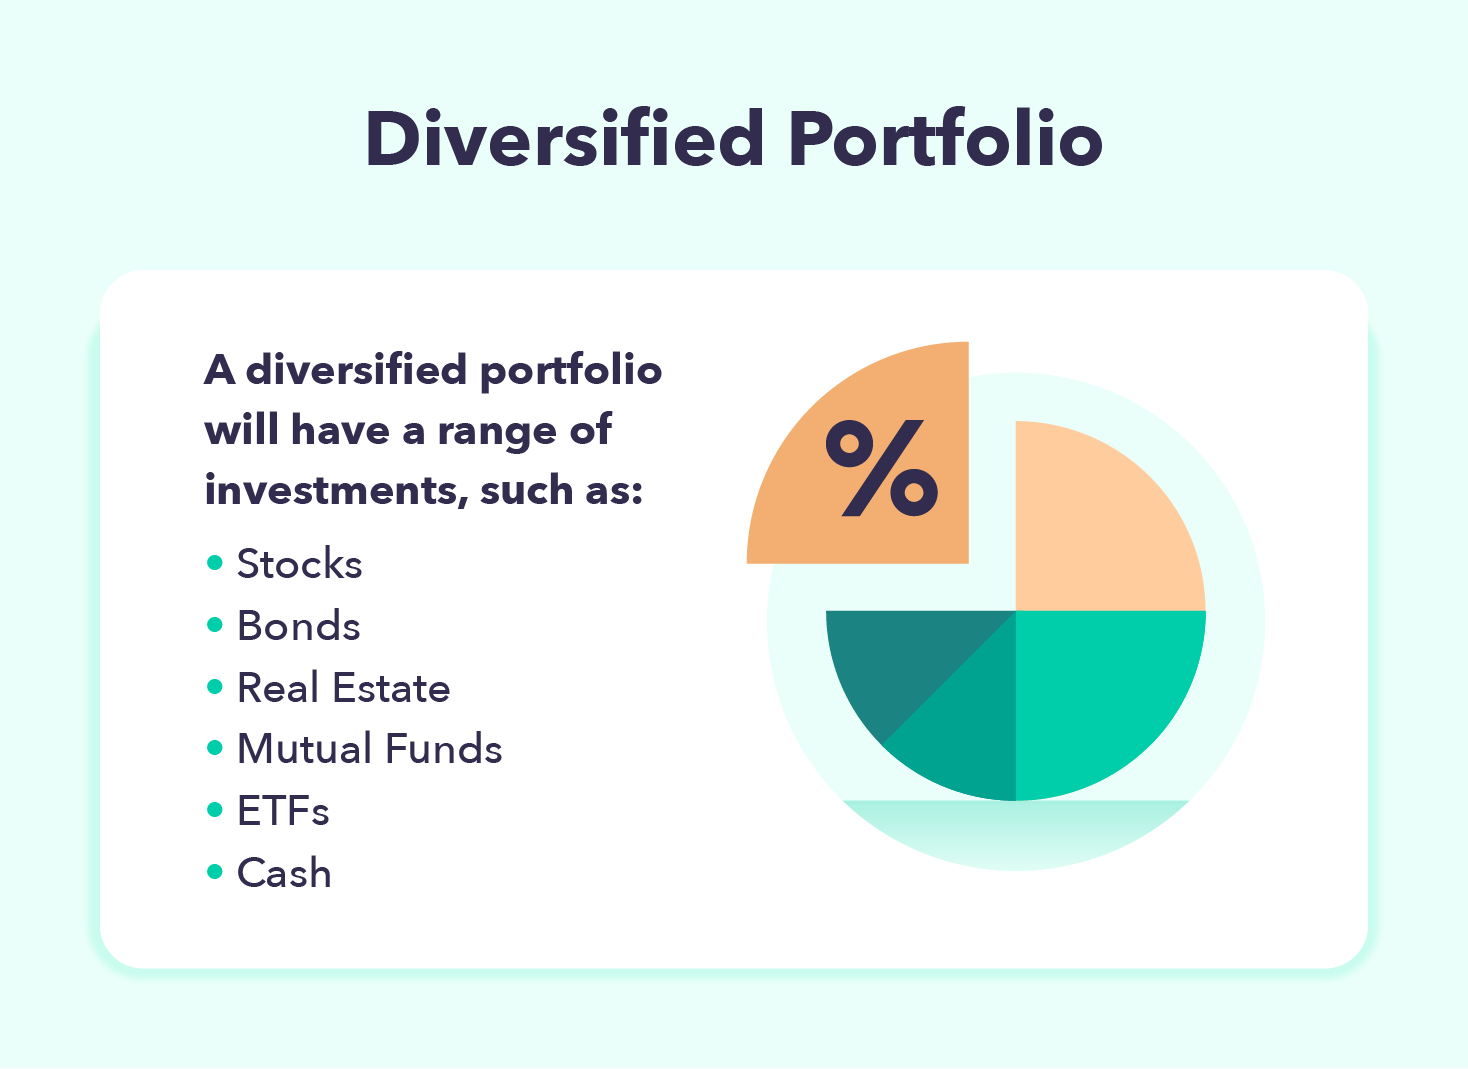 A diversified portfolio may include: stocks, bonds, real estate, mutual funds, ETFs, and cash. 